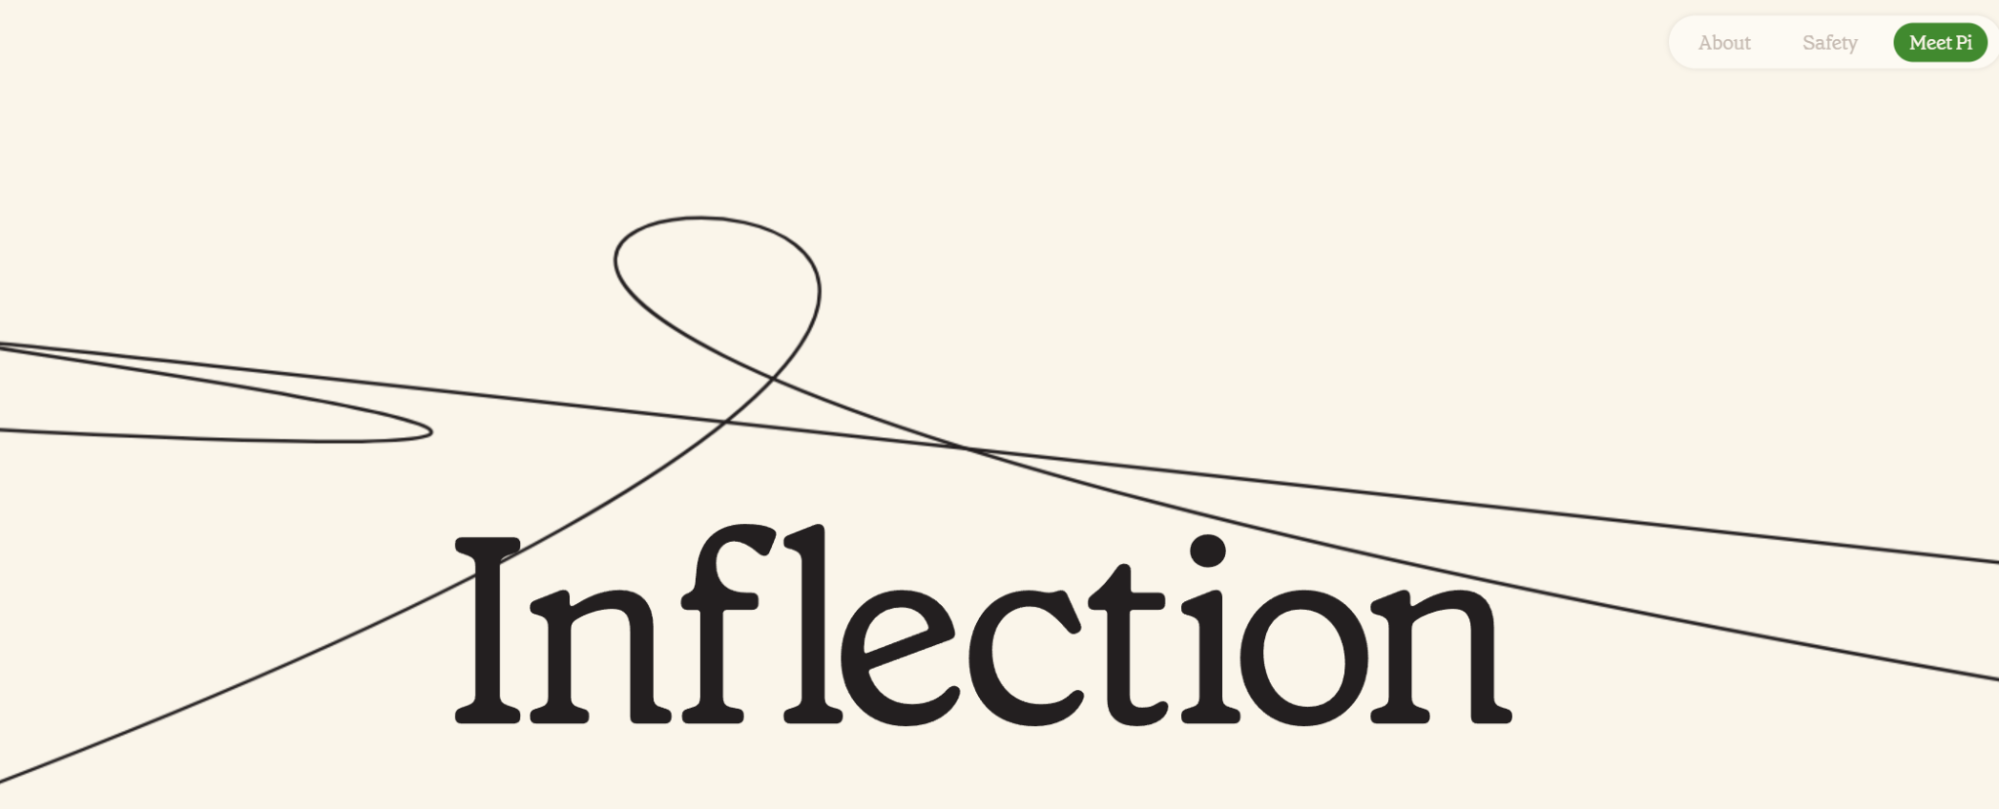 Launched in 2022, Inflection created a personal intelligence AI, named Pi, to assist in a range of use cases.